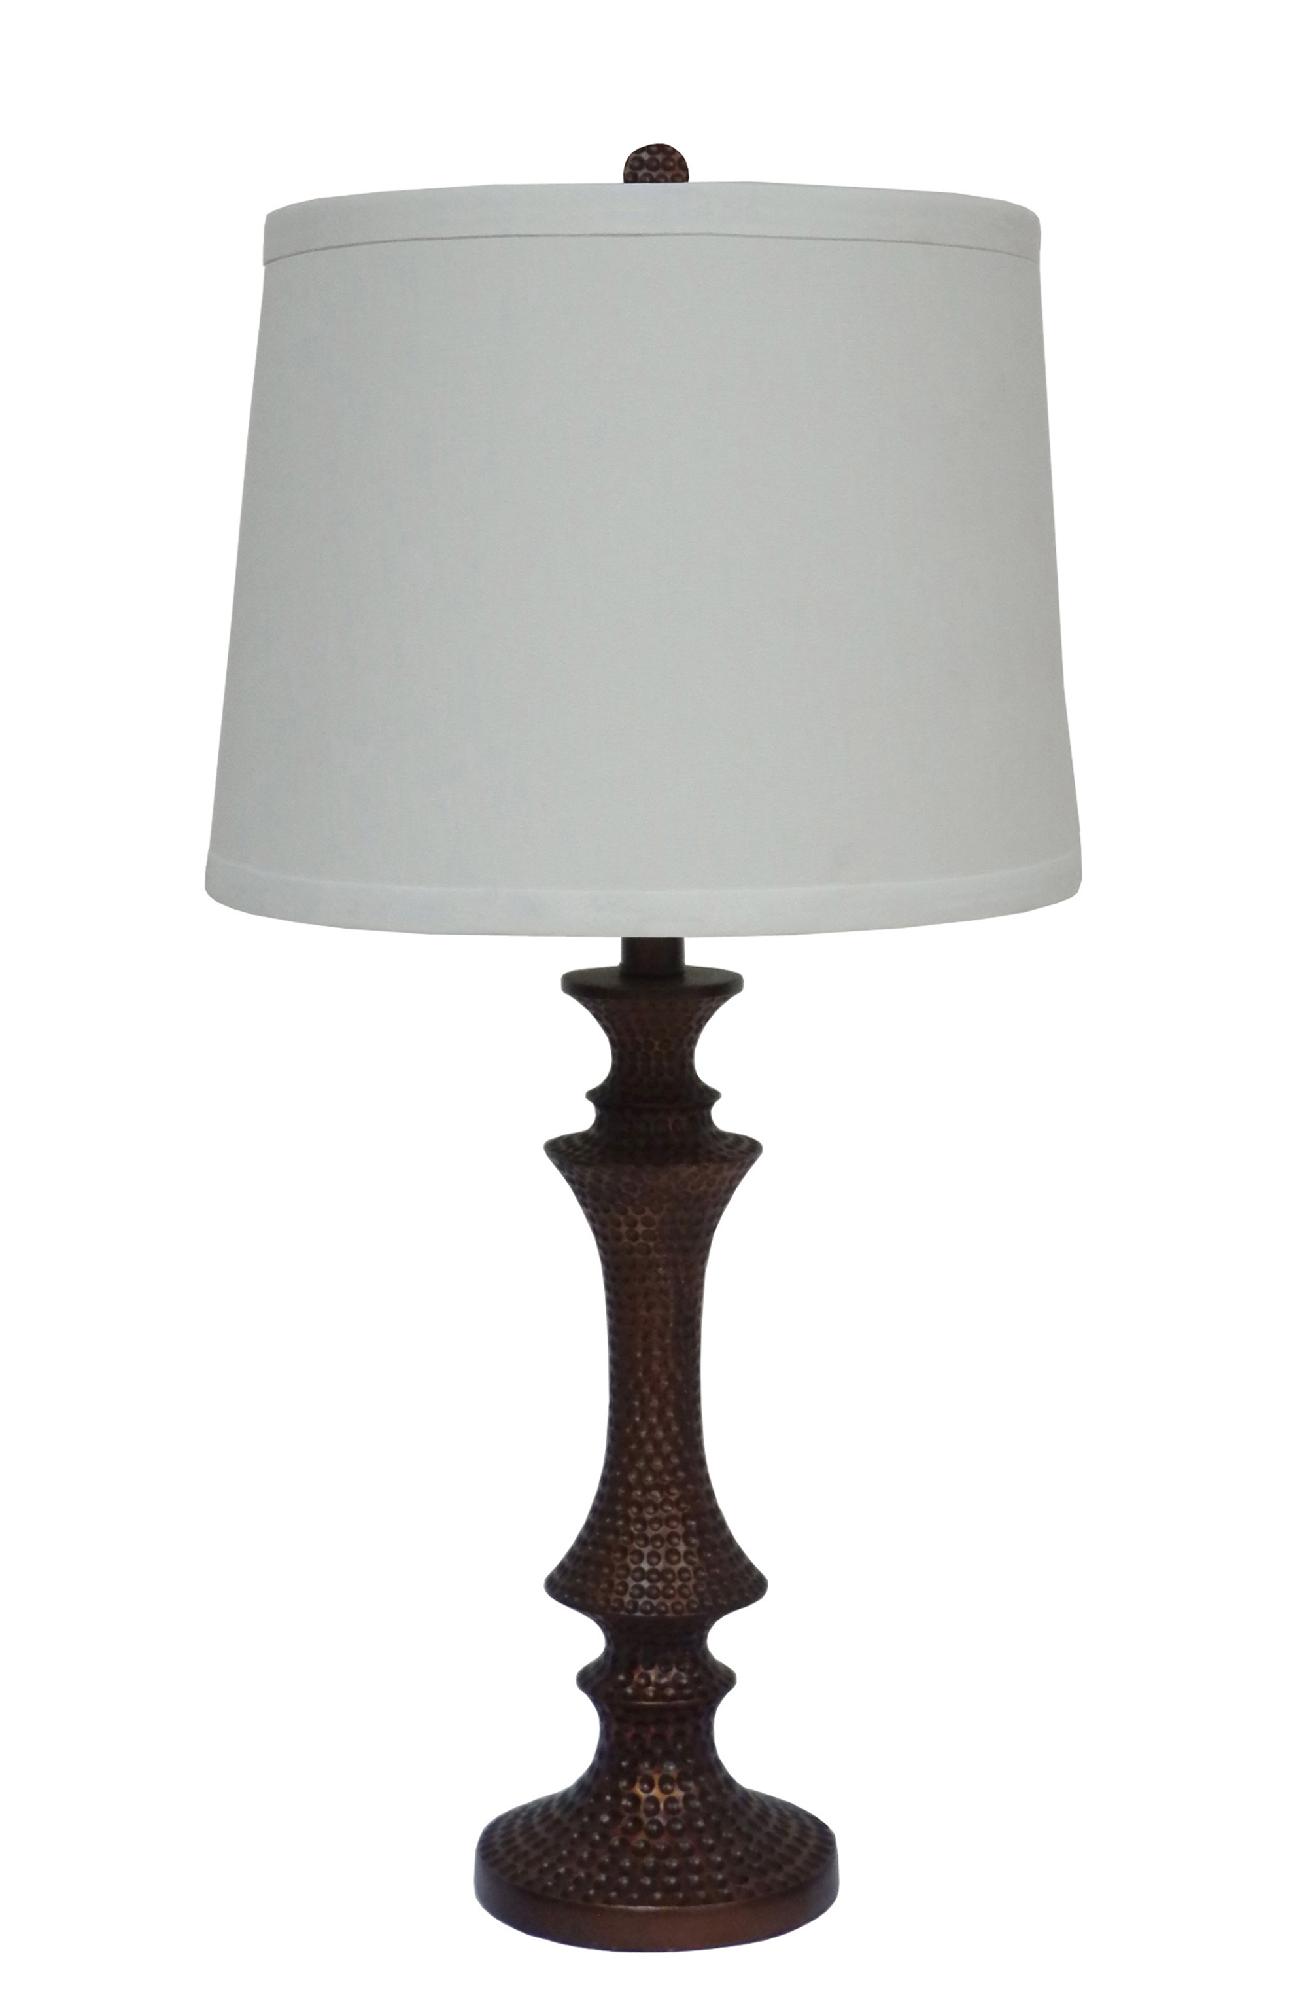 28" Resin Table Lamp with Antique Gold Finish.